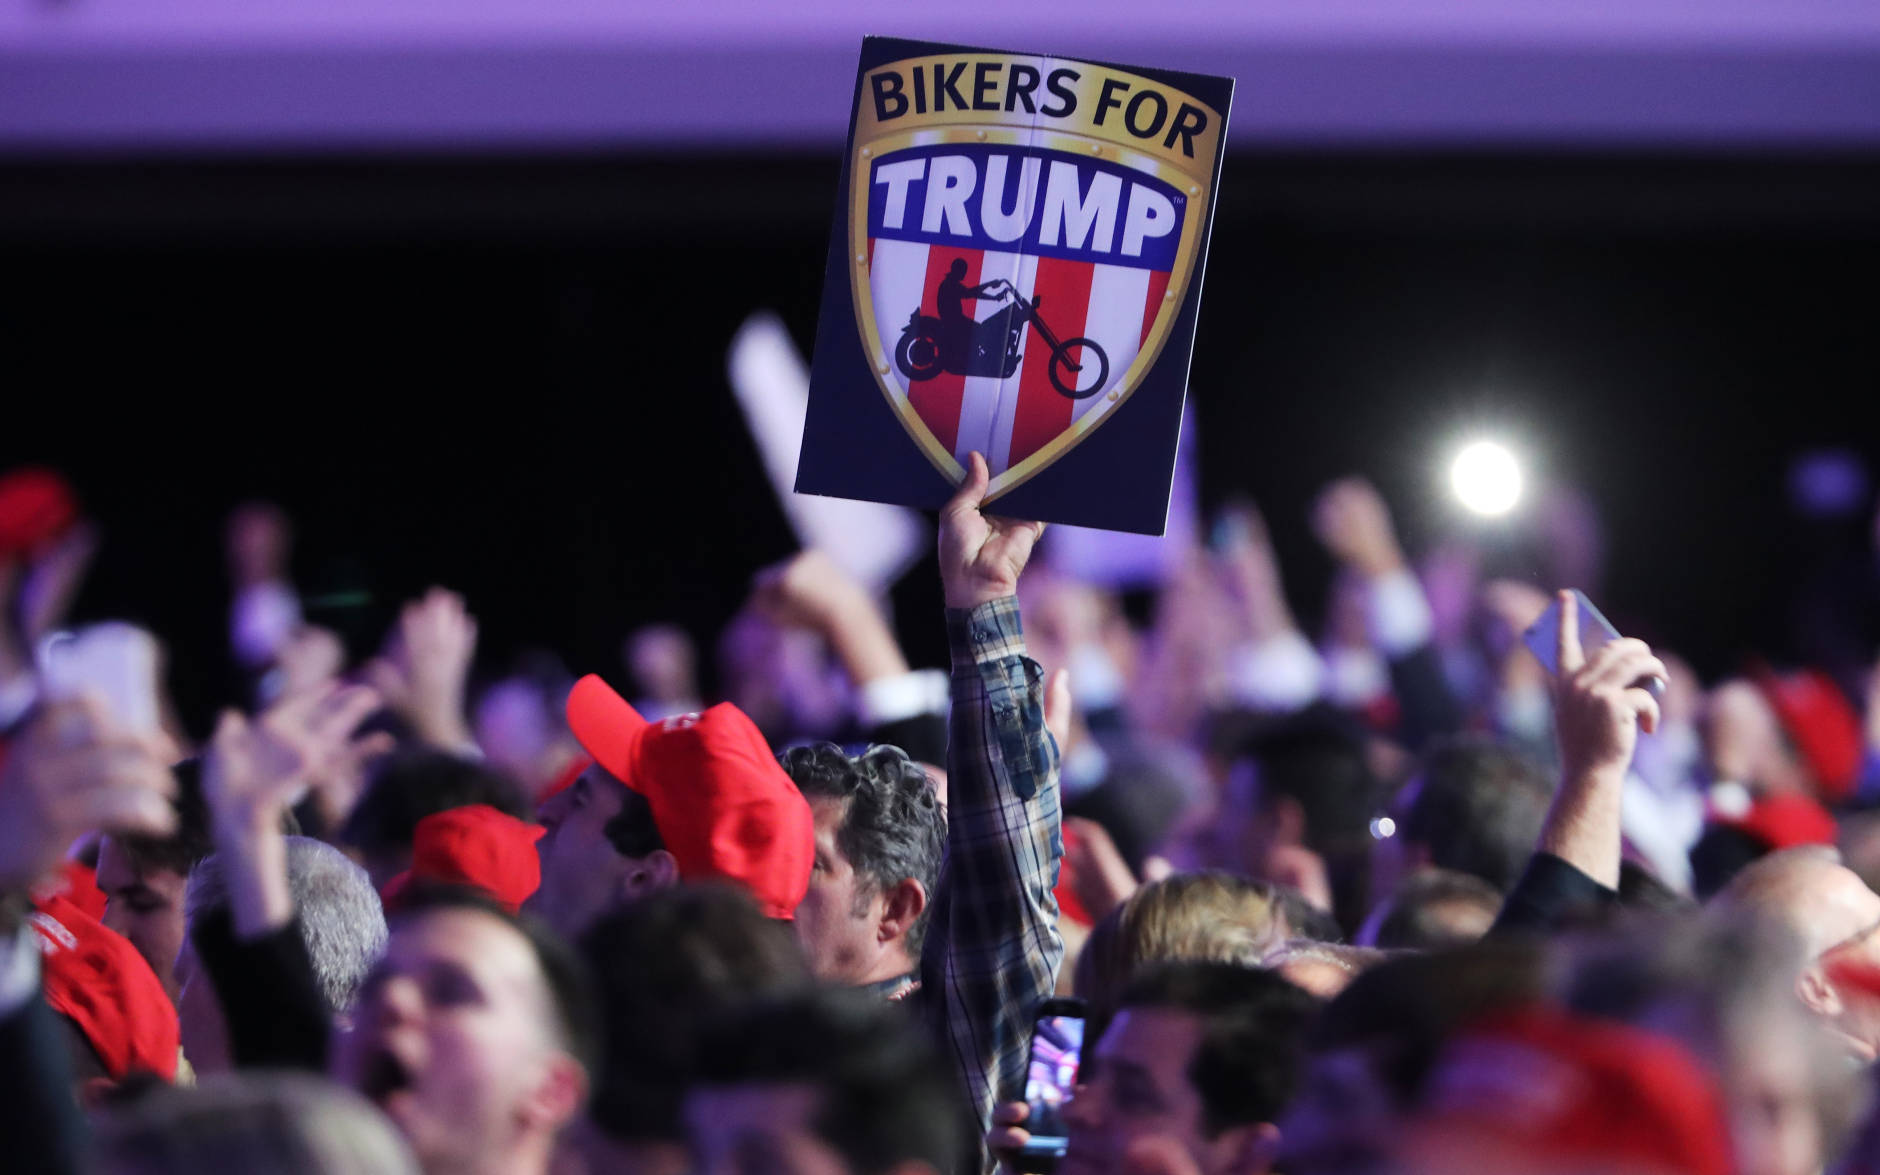 NEW YORK, NY - NOVEMBER 08:  An attendee holds up a sign in support of Republican presidential nominee Donald Trump that reads "Bikers For Trump" during the election night event at the New York Hilton Midtown on November 8, 2016 in New York City. Americans today will choose between Republican presidential nominee Donald Trump and Democratic presidential nominee Hillary Clinton as they go to the polls to vote for the next president of the United States.  (Photo by Spencer Platt/Getty Images)